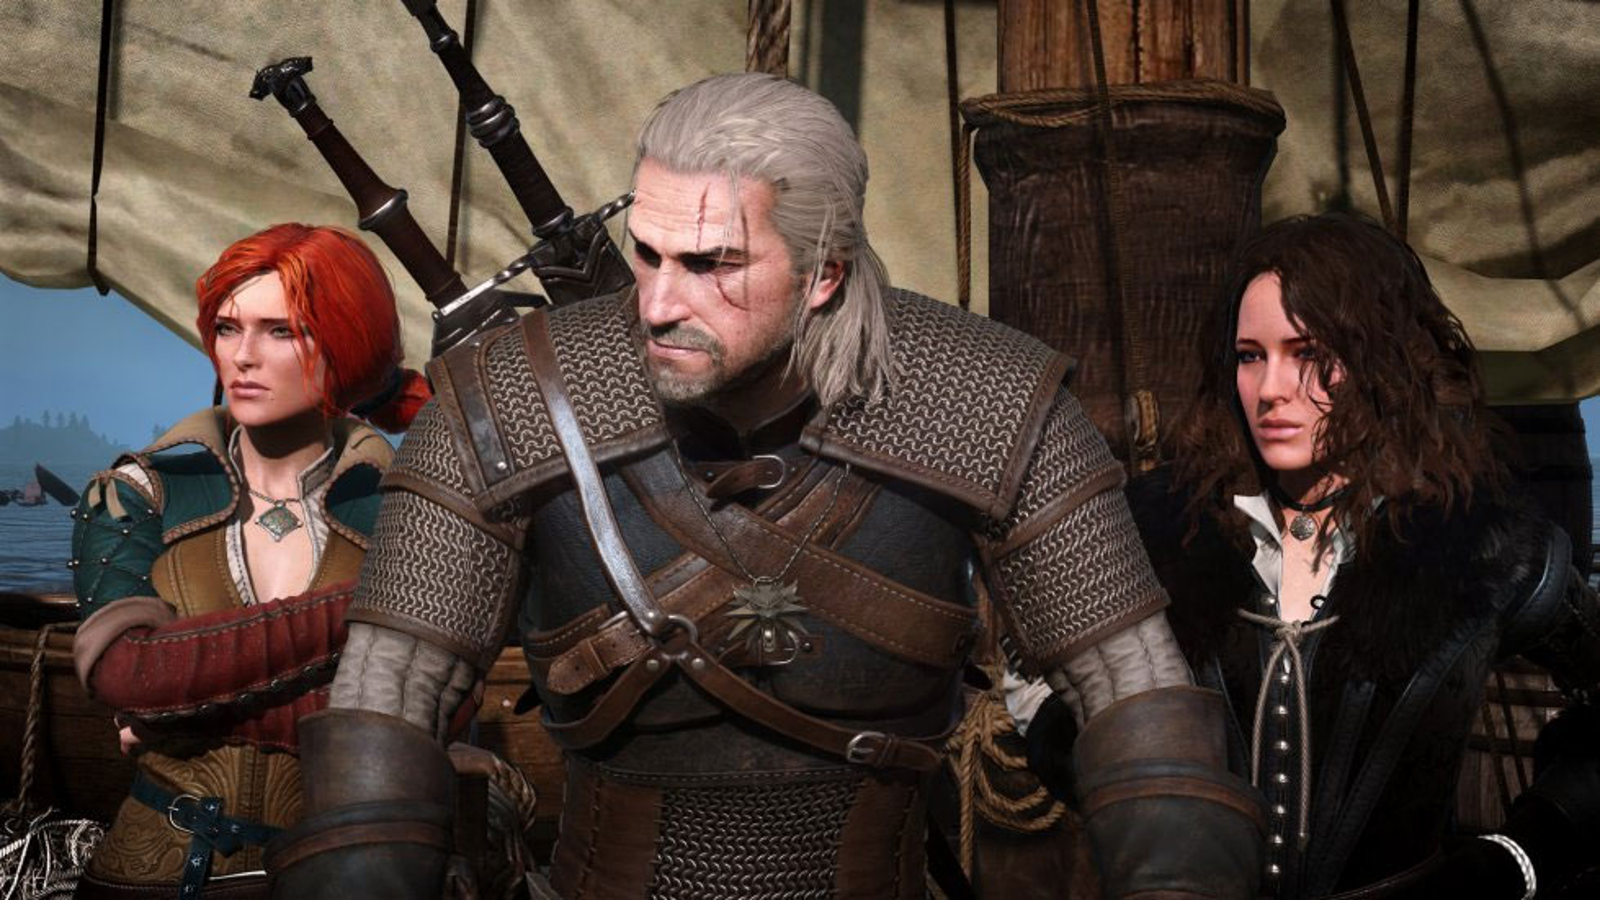 Why The Witcher "needed" to be on VG247